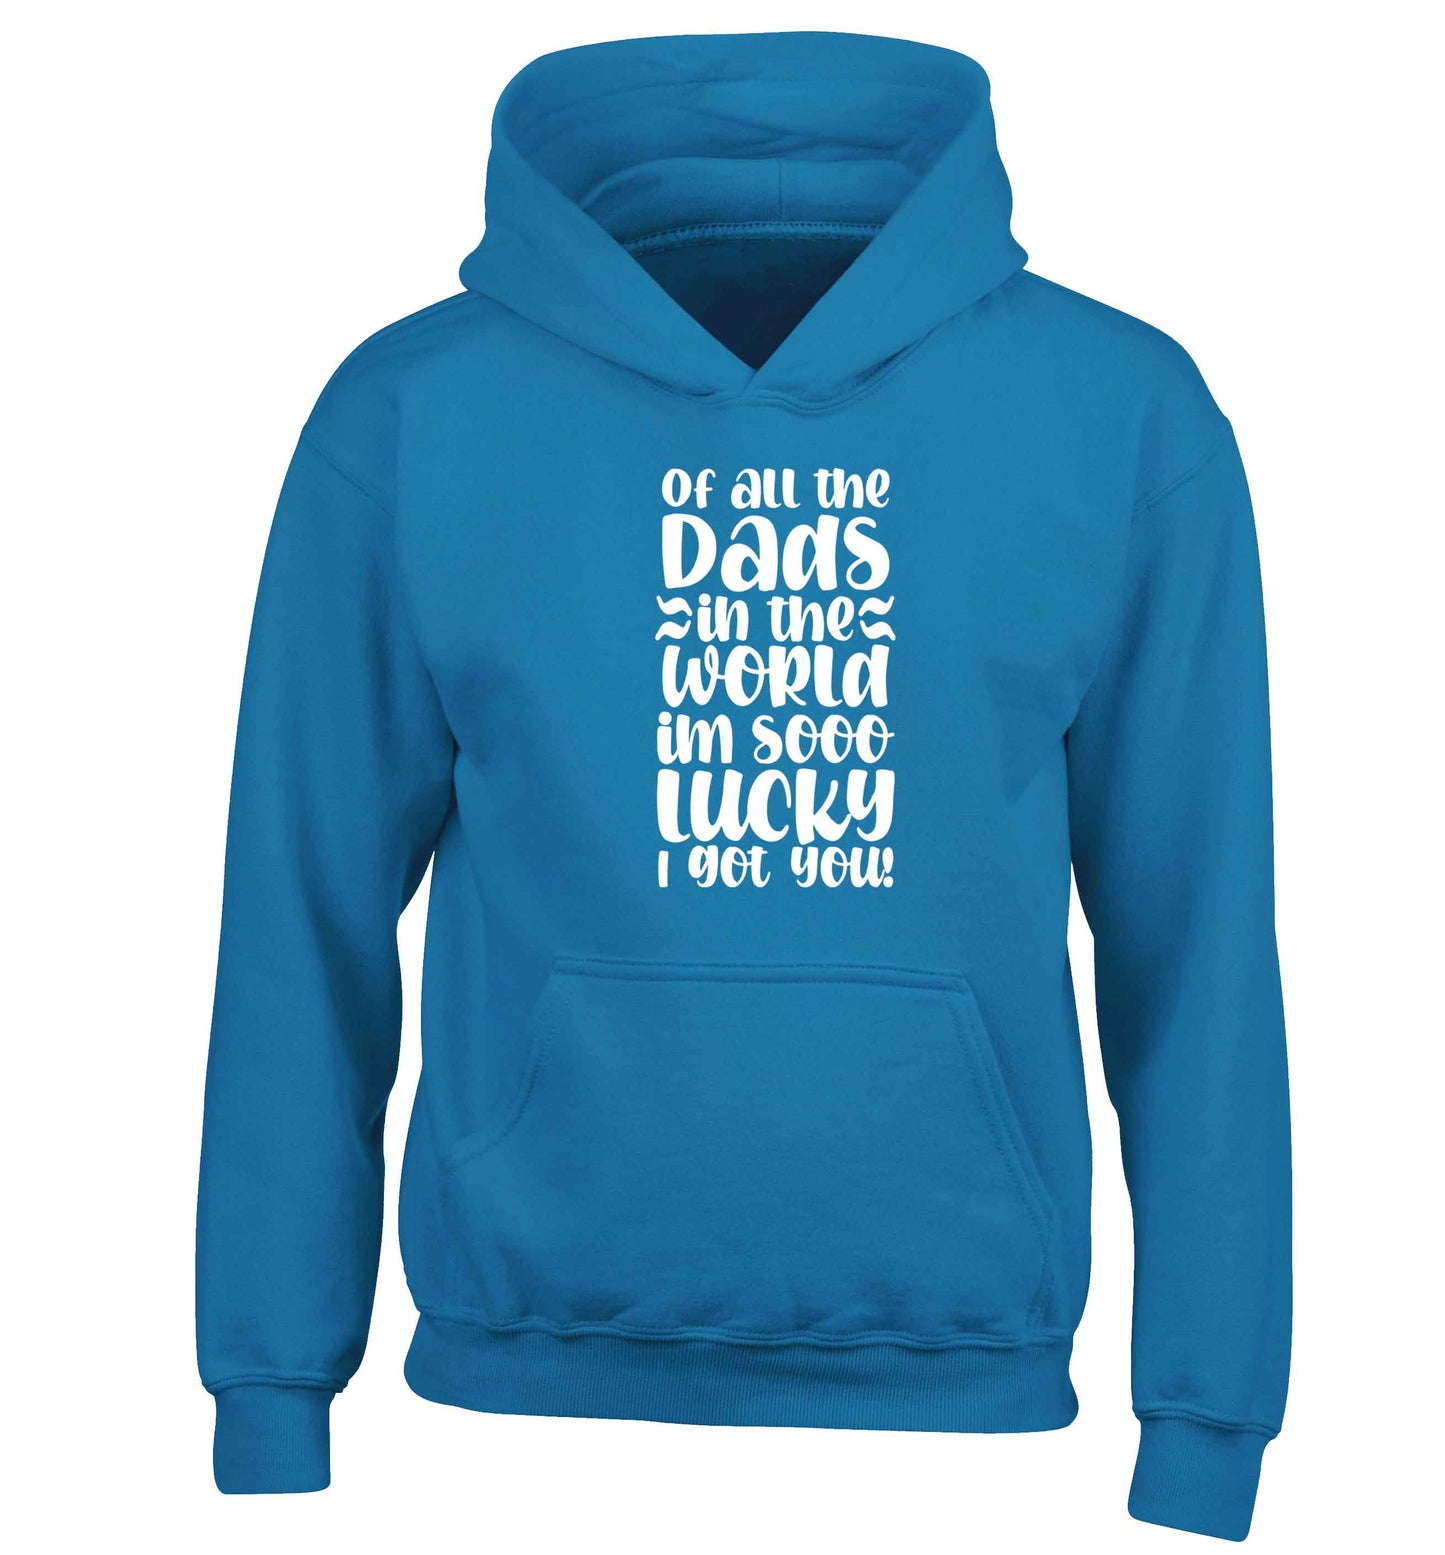 Of all the Dads in the world I'm so lucky I got you children's blue hoodie 12-13 Years